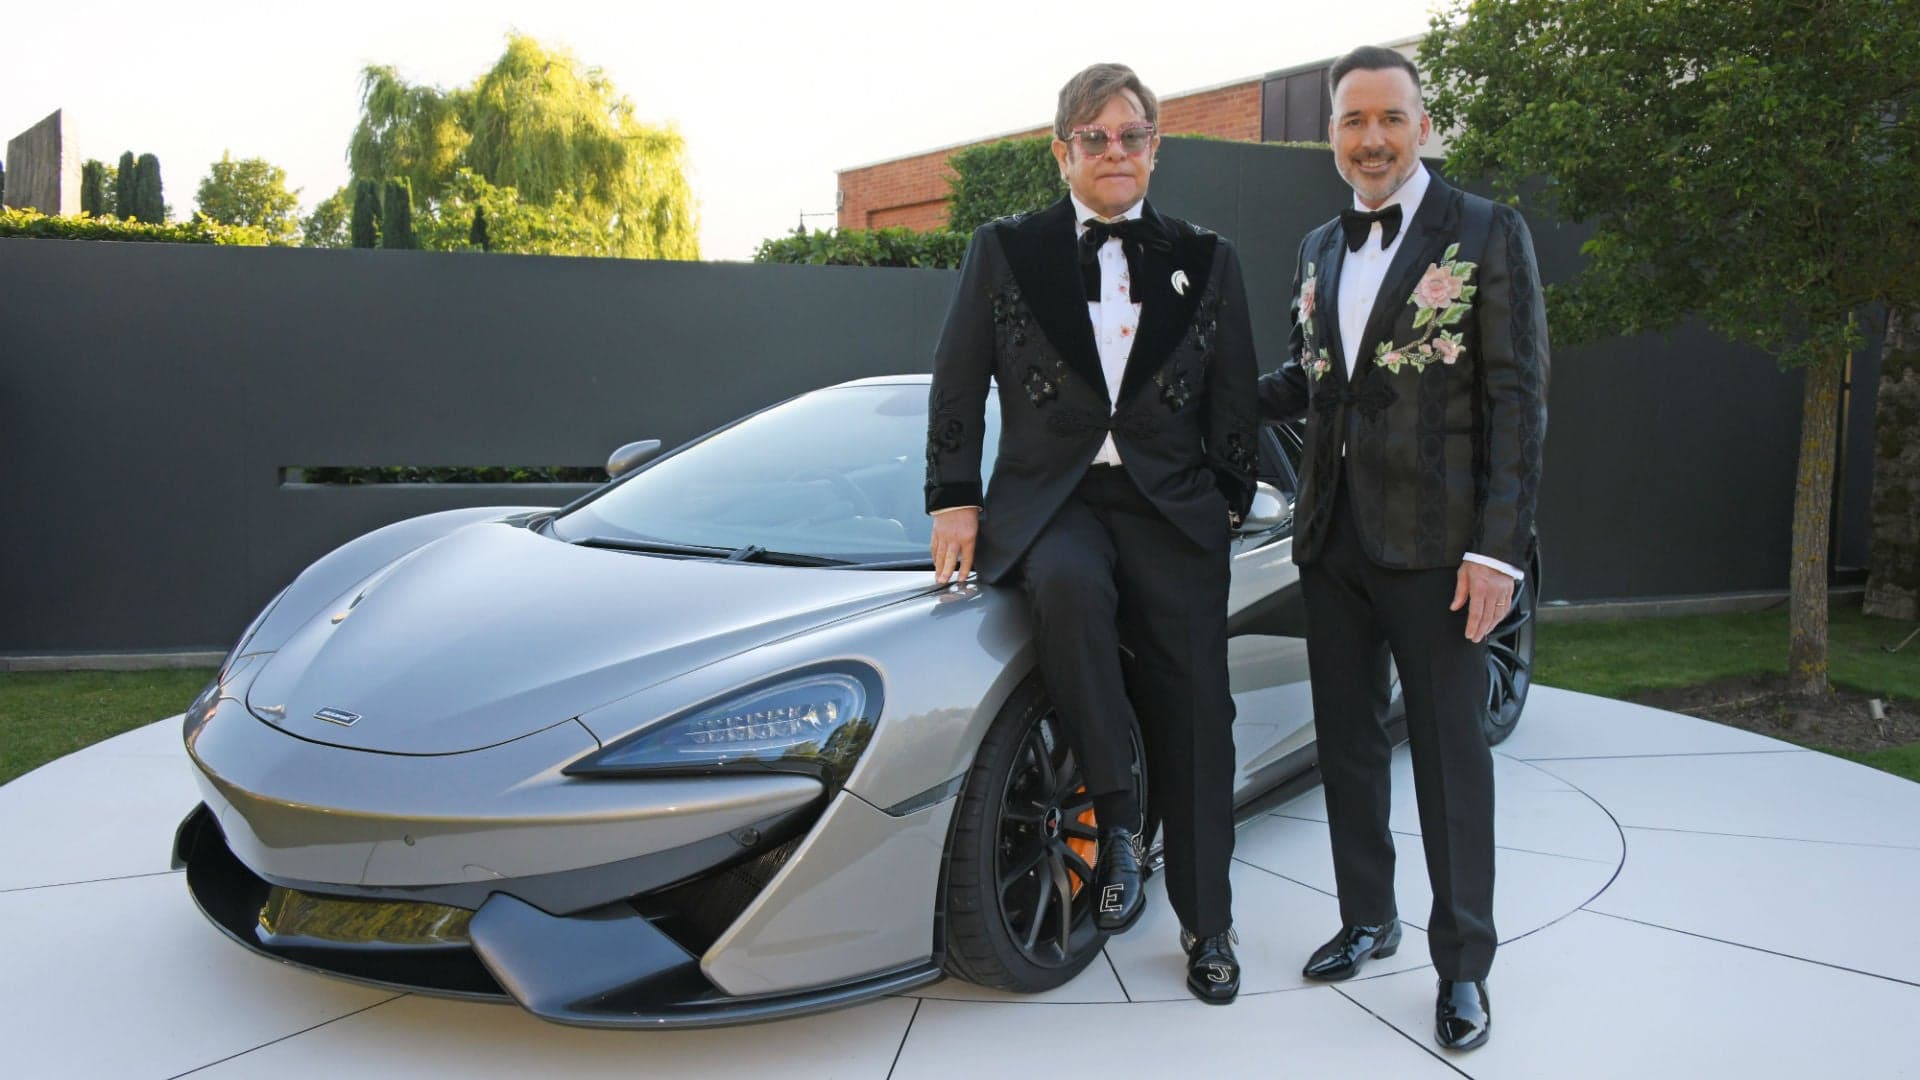 McLaren 570S Spider Sells for $948,000 at Elton John’s AIDS Foundation’s Argento Ball